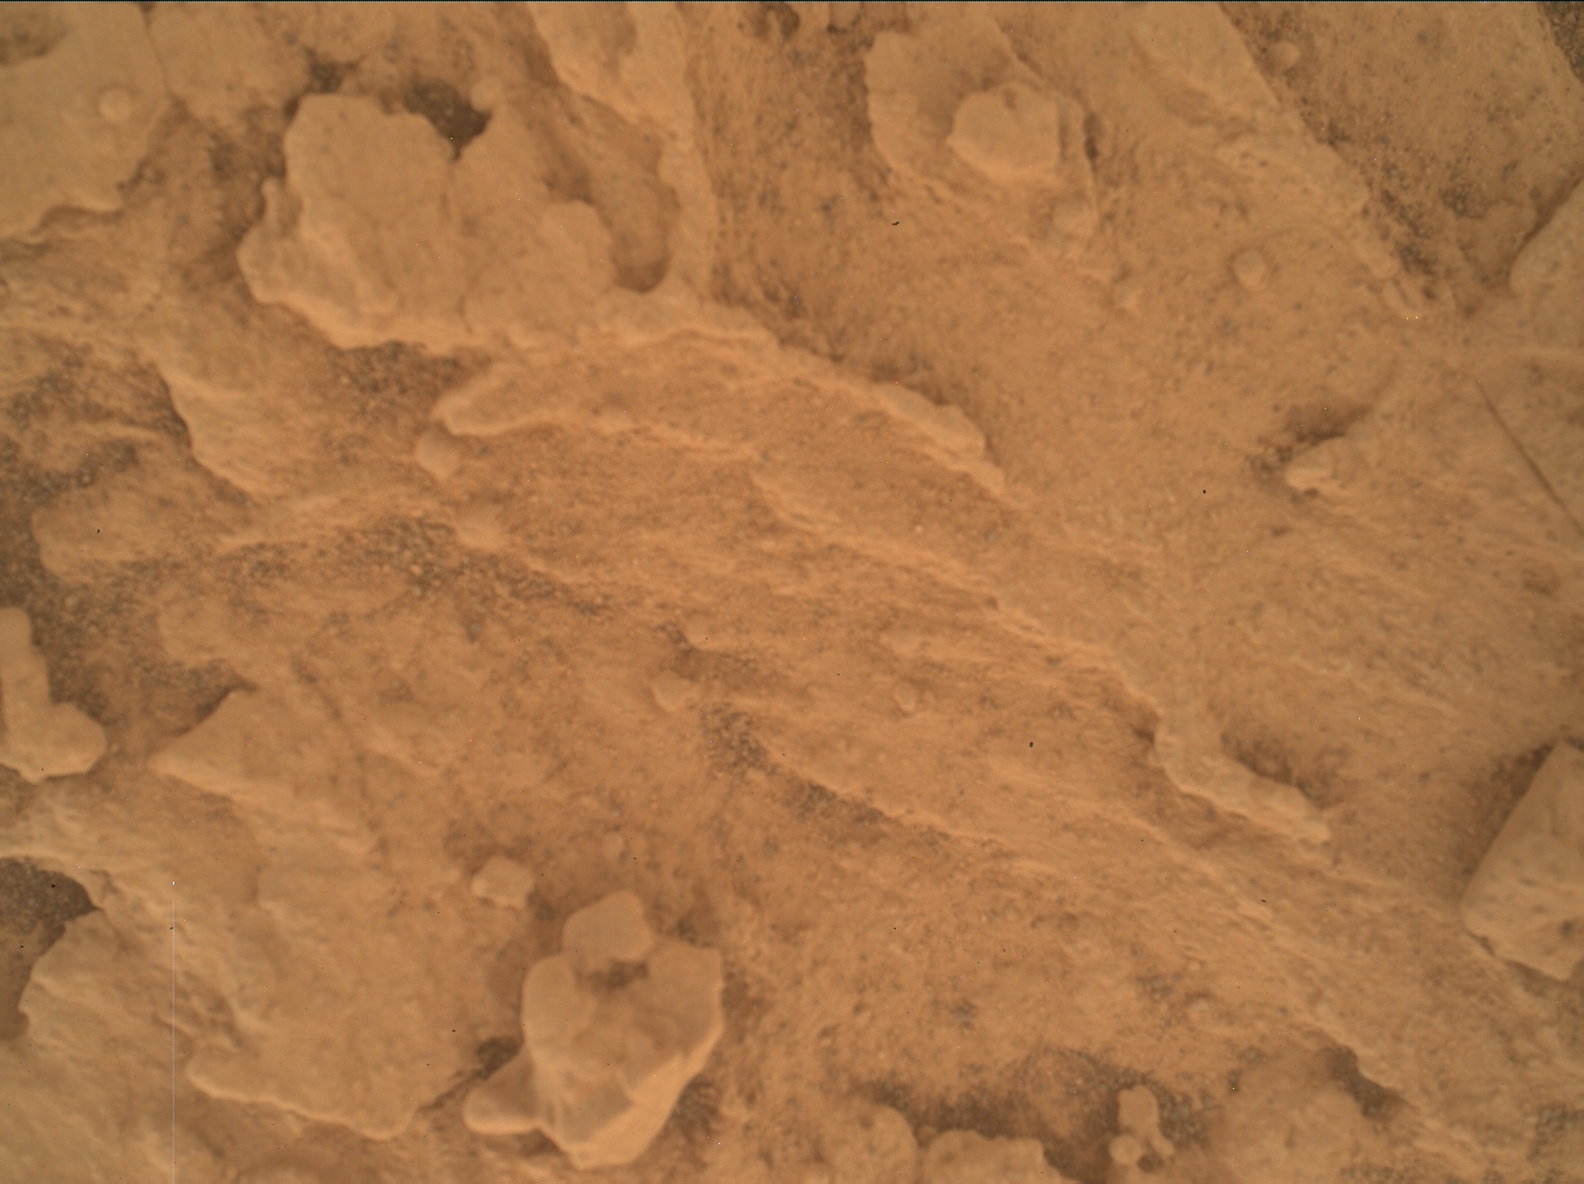 Nasa's Mars rover Curiosity acquired this image using its Mars Hand Lens Imager (MAHLI) on Sol 3347